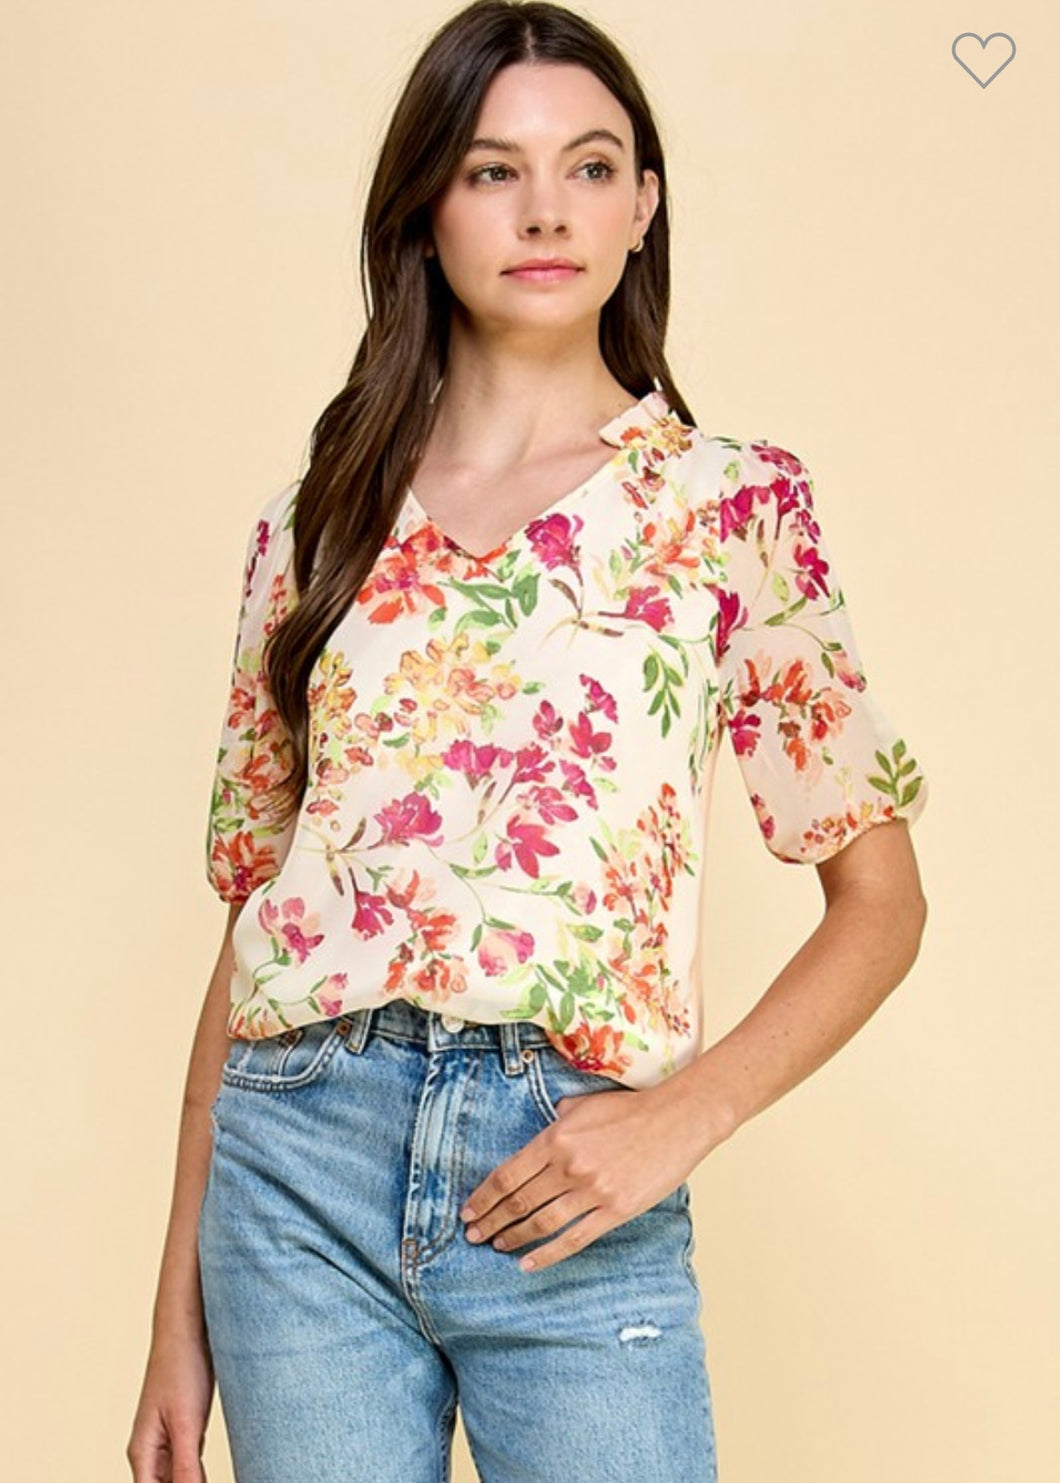 Floral top with solid back